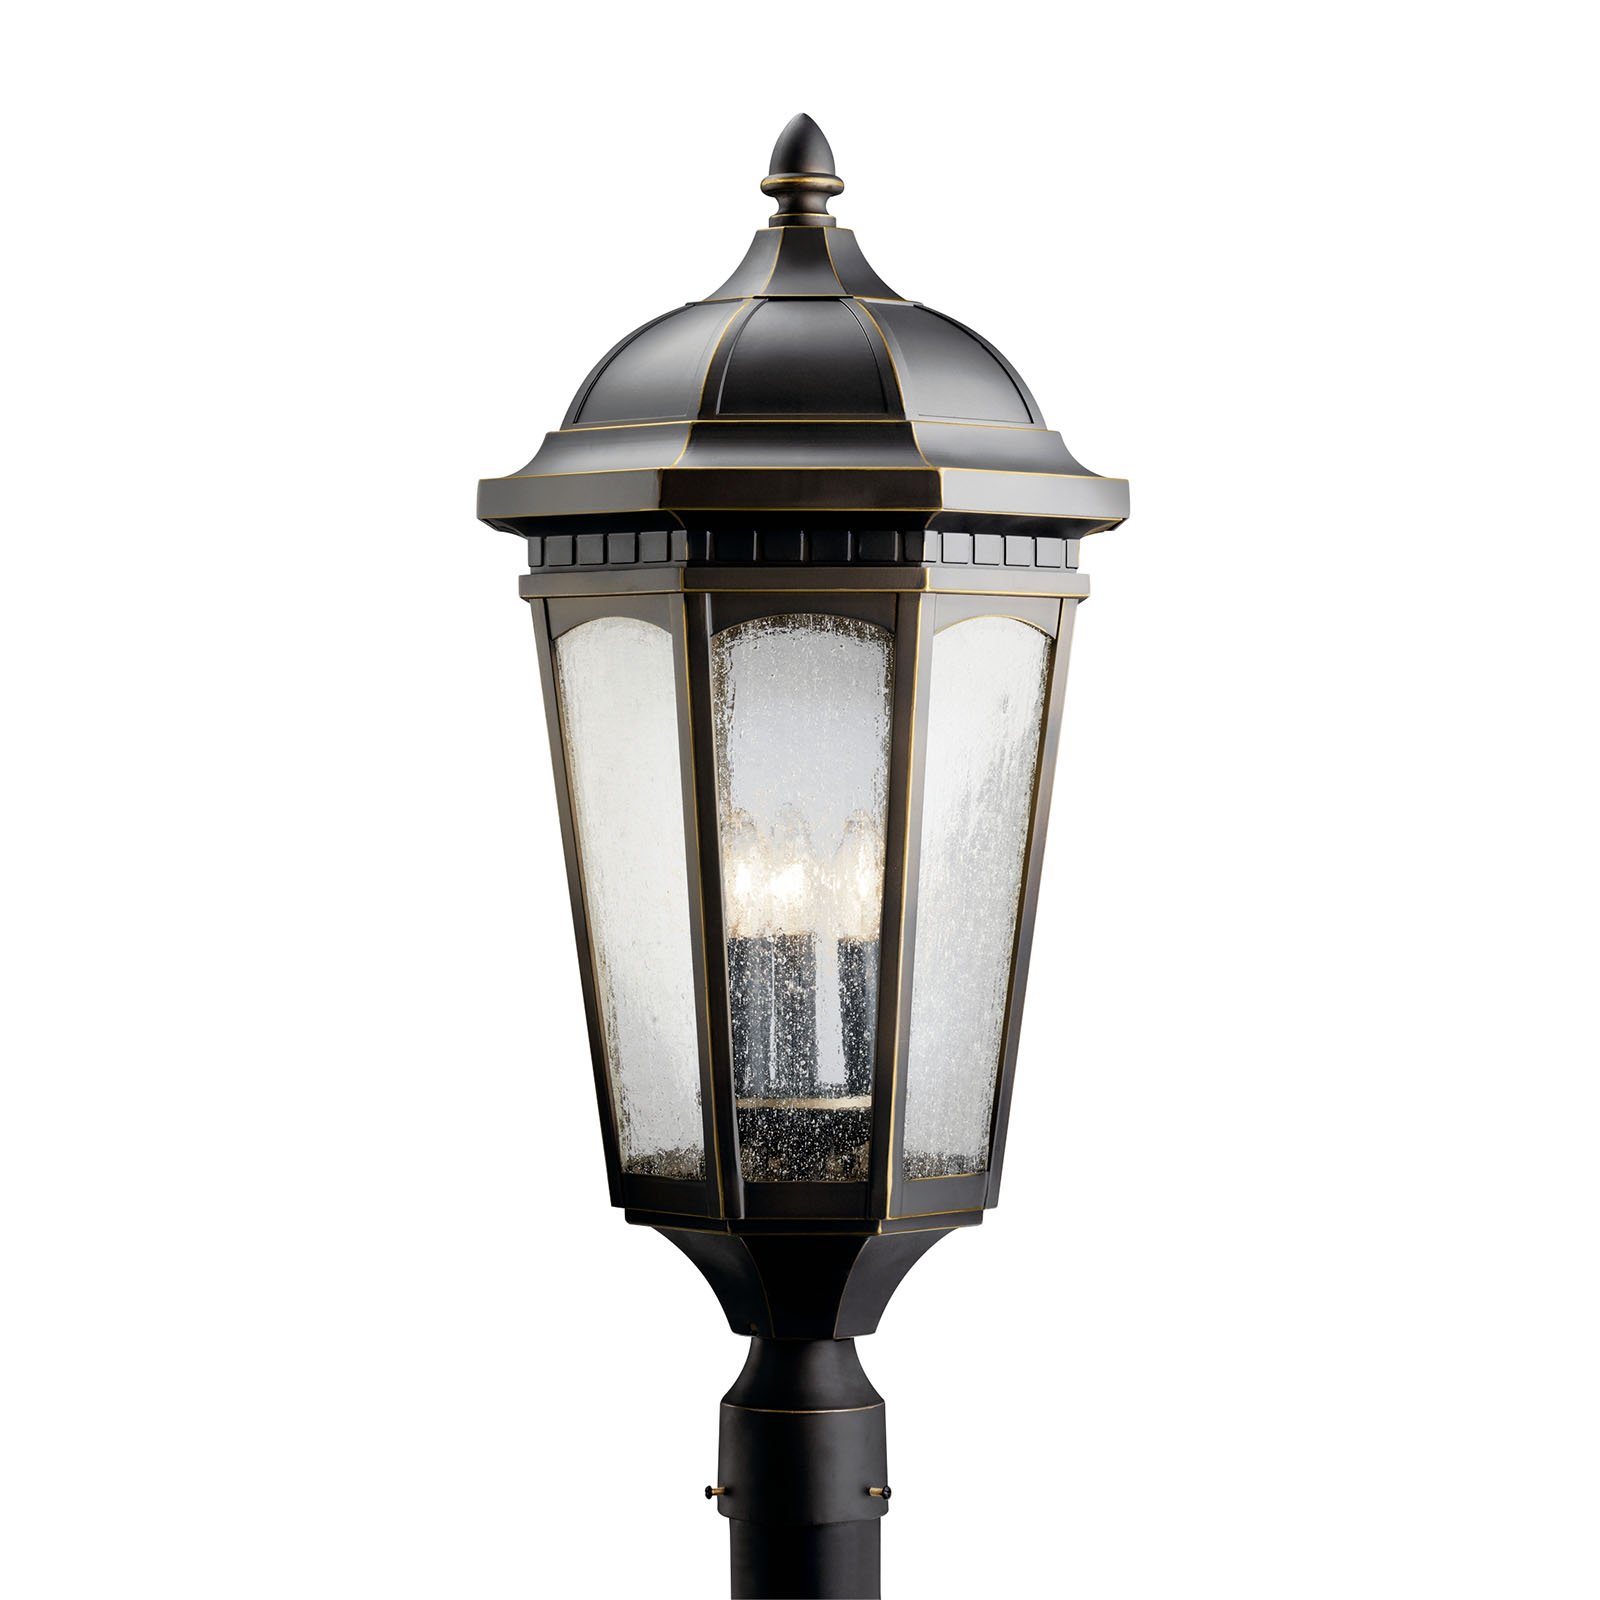 Uncluttered and traditional, this large attractive 3 light post-top fixture from the Courtyard(TM) collection adds the warmth of a secluded terrace to any patio or porch.  What a welcoming beacon for your home's exterior. Done in a Rubbed Bronze finish with Clear-seedy glass.  Post not included.